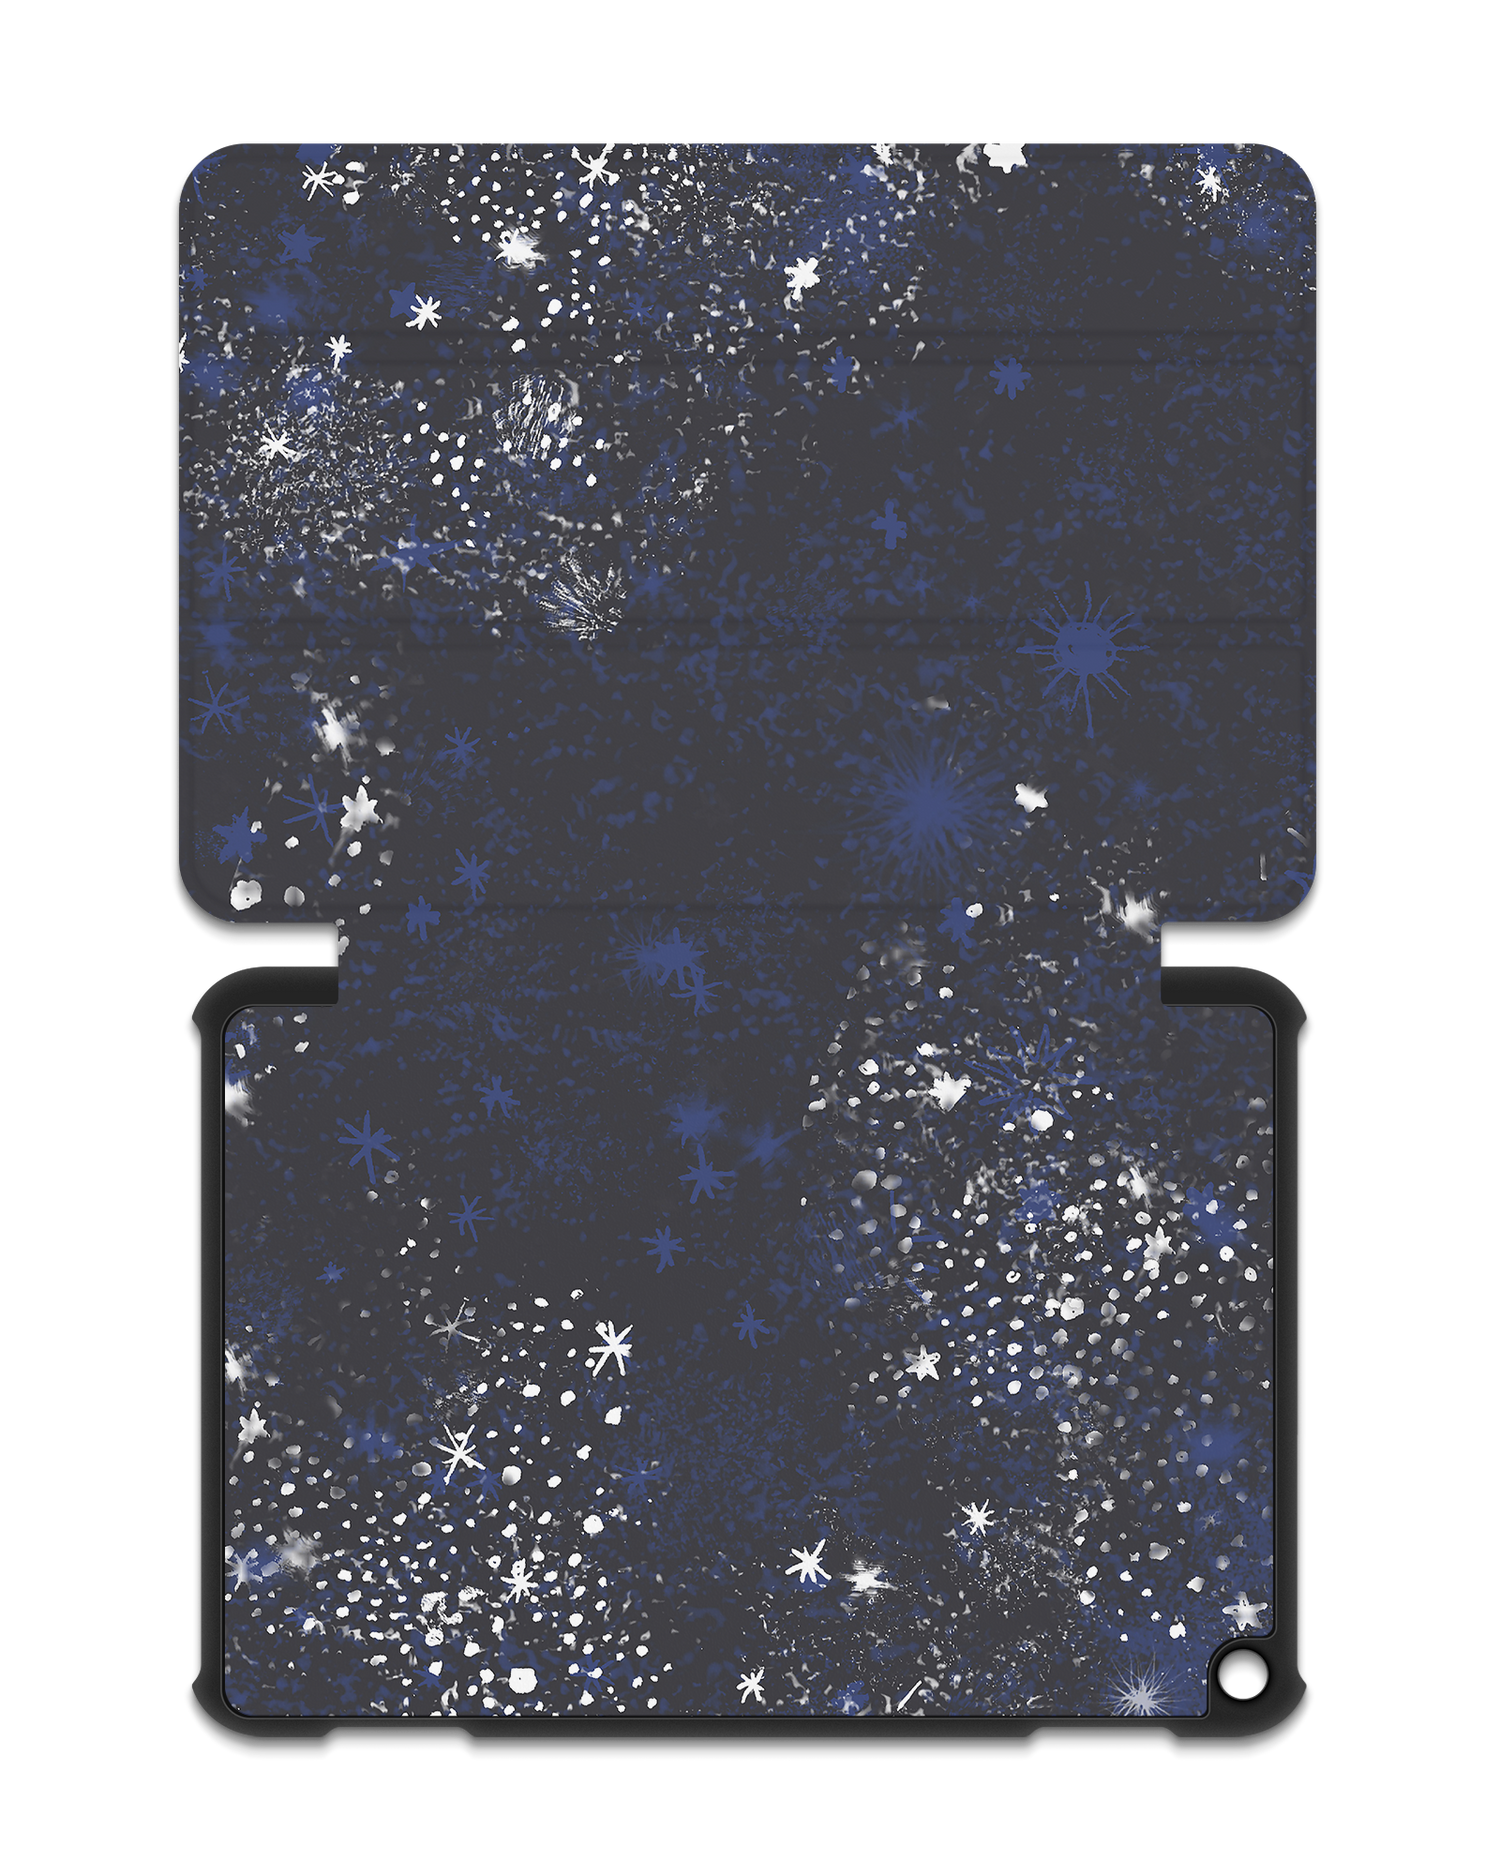 Starry Night Sky Tablet Smart Case for Amazon Fire HD 8 (2022), Amazon Fire HD 8 Plus (2022), Amazon Fire HD 8 (2020), Amazon Fire HD 8 Plus (2020): Opened